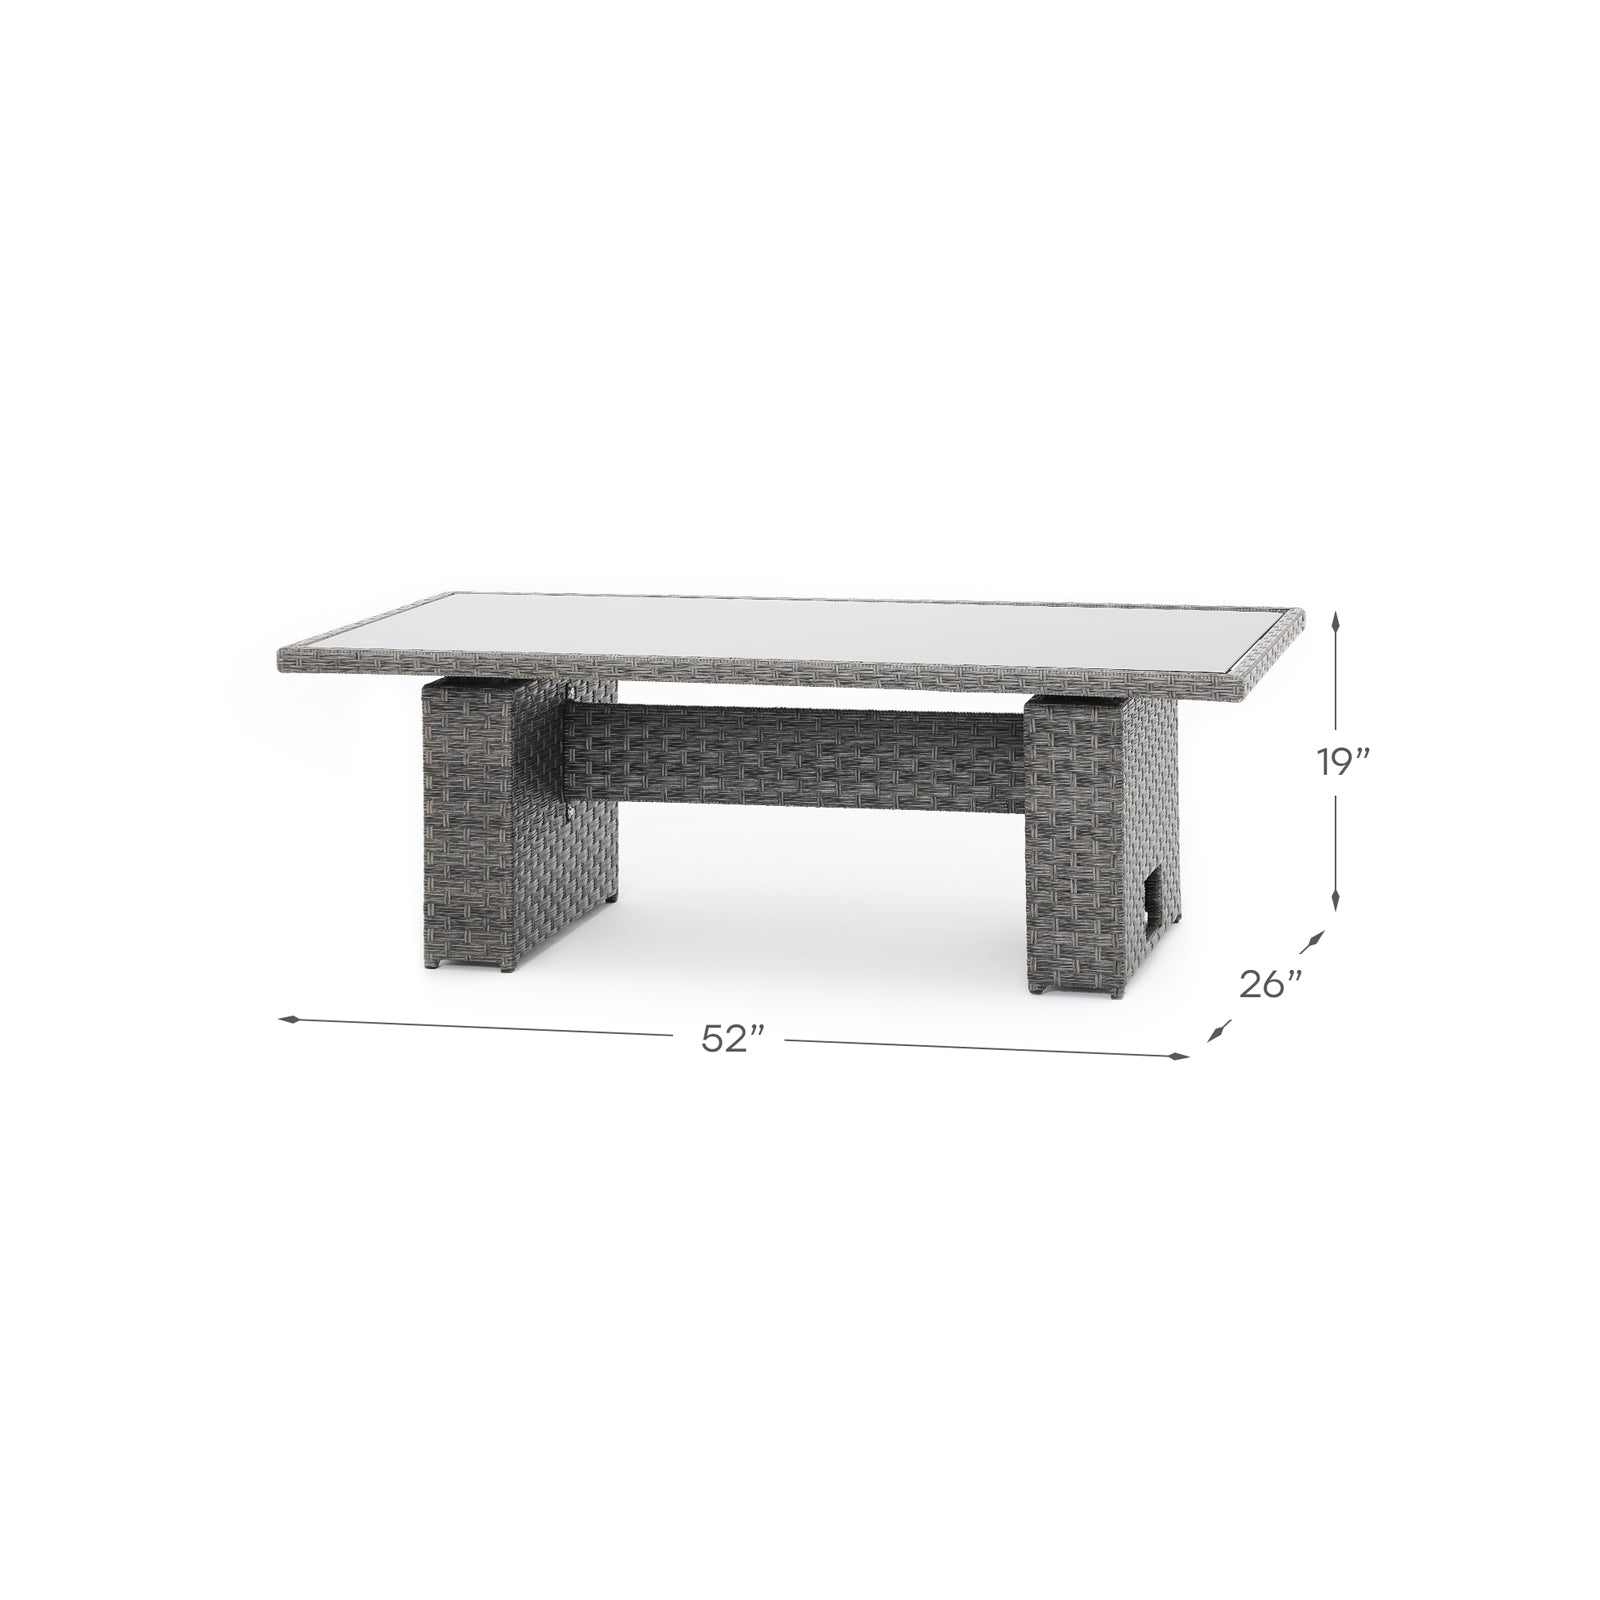 Aiya Grey wicker outdoor lift top dining table with metal frame, fold dimension info - Jardina Furniture